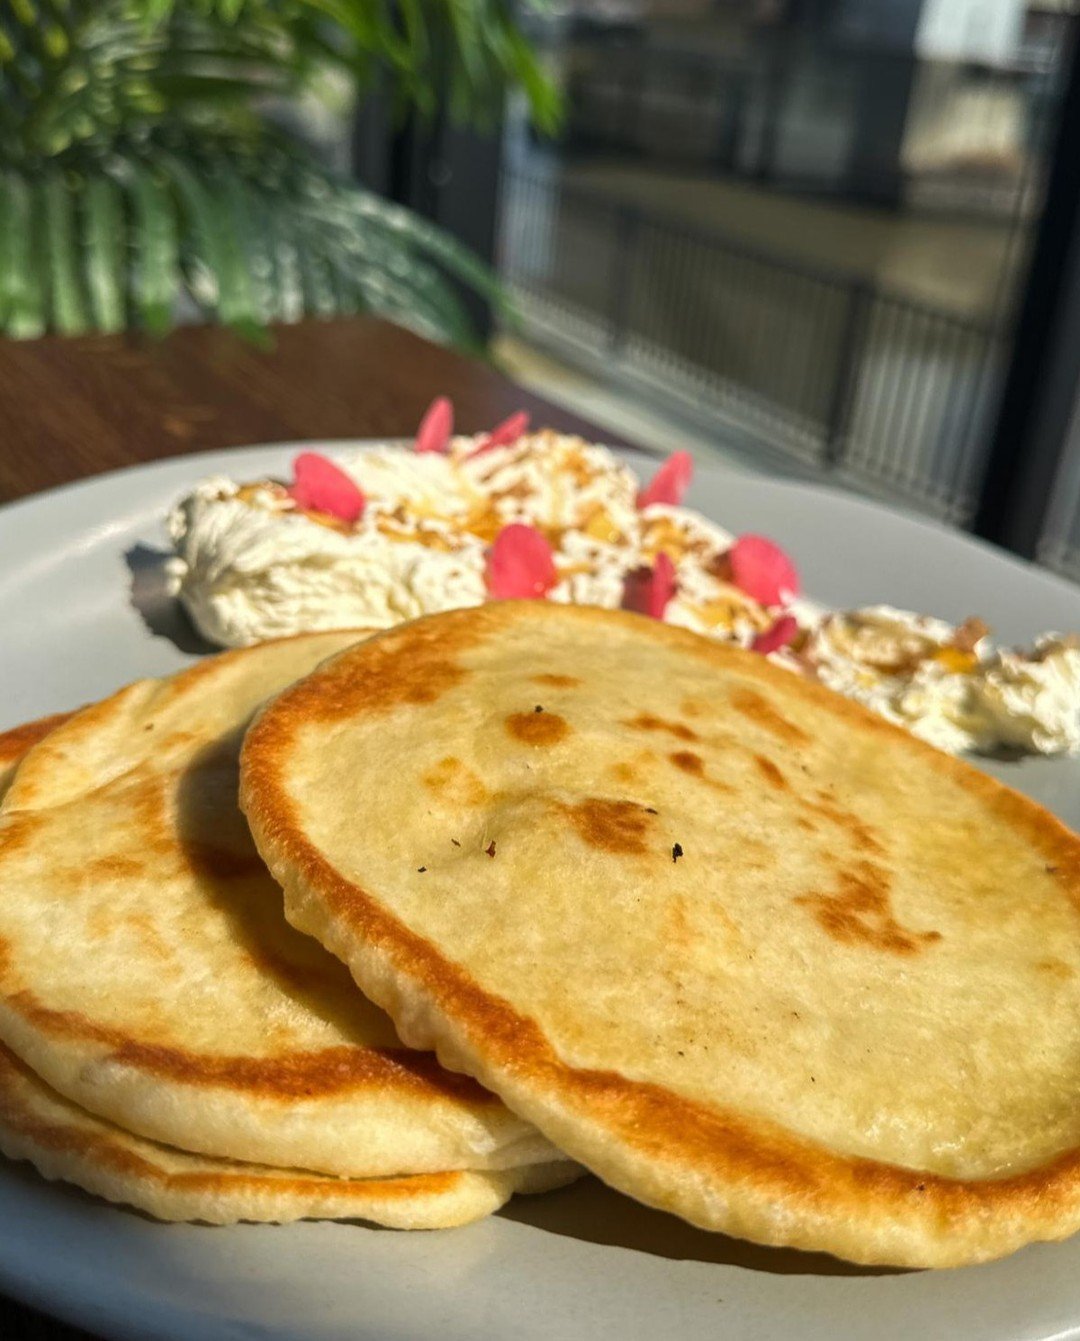 Housemade pita griddled fresh to order 👌🏻

Top it, smear it or dip it in our incredible whipped butter, topped with honey, smoked sea salt and radishes.

#primaryfoodgroup #seasmokegrill #cocktails #oysters #upstatenewyork #518 #upstateny #troyny #